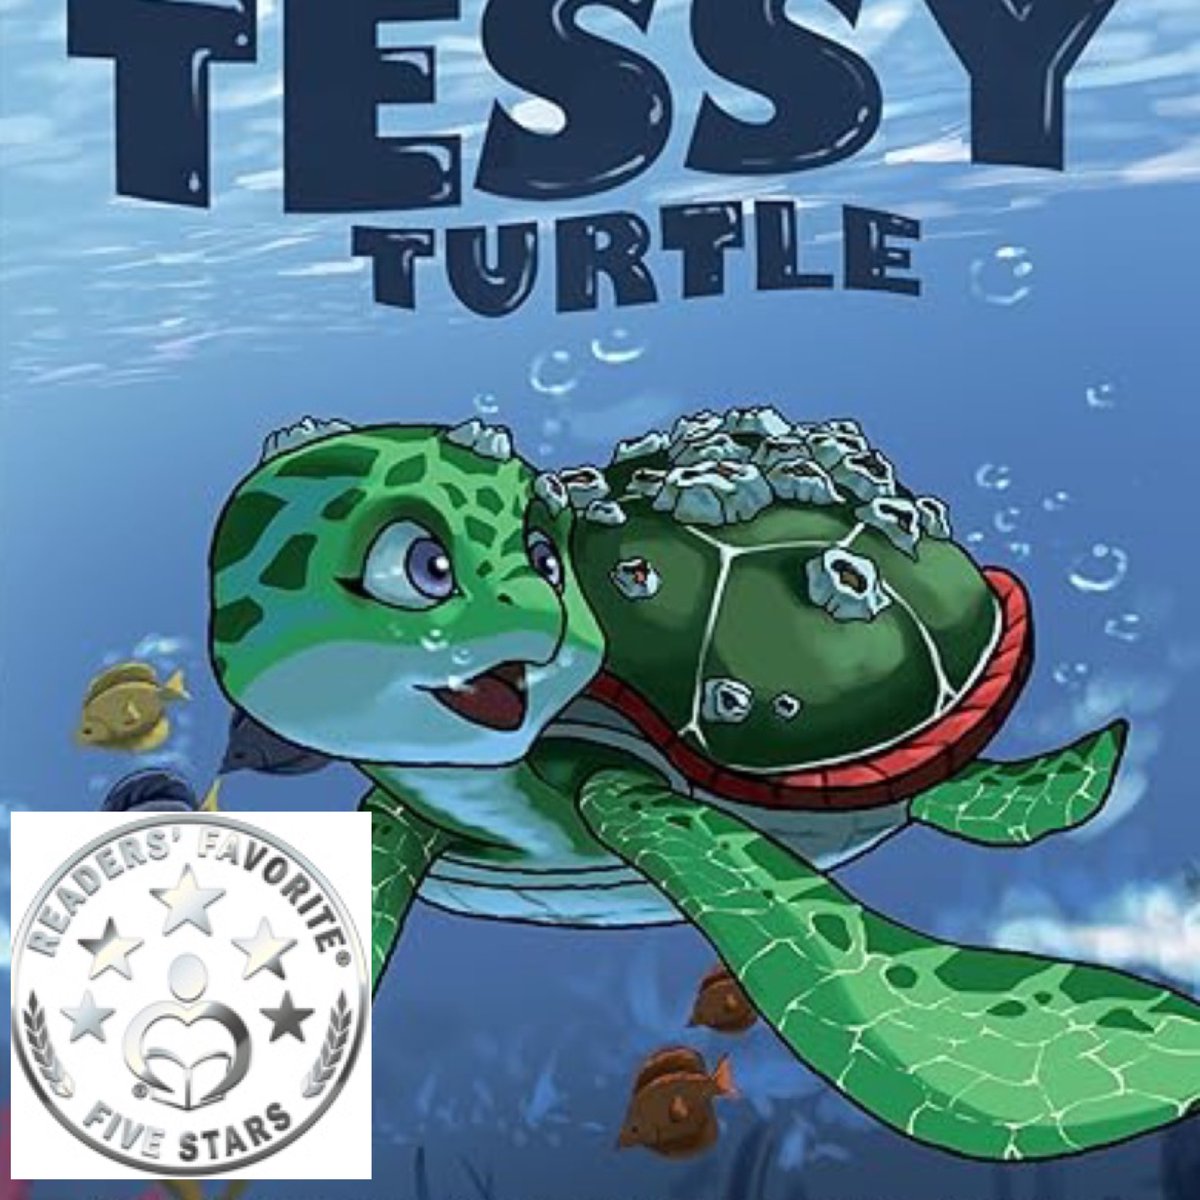 Wishing you a wonderful day! Thank you on behalf of Tessy! She’s in the top 100 Best Sellers on Amazon ‼️❤️❤️❤️❤️❤️ #childrensbook #endangeredspecies #greenseaturtle a.co/d/8IZ4n57